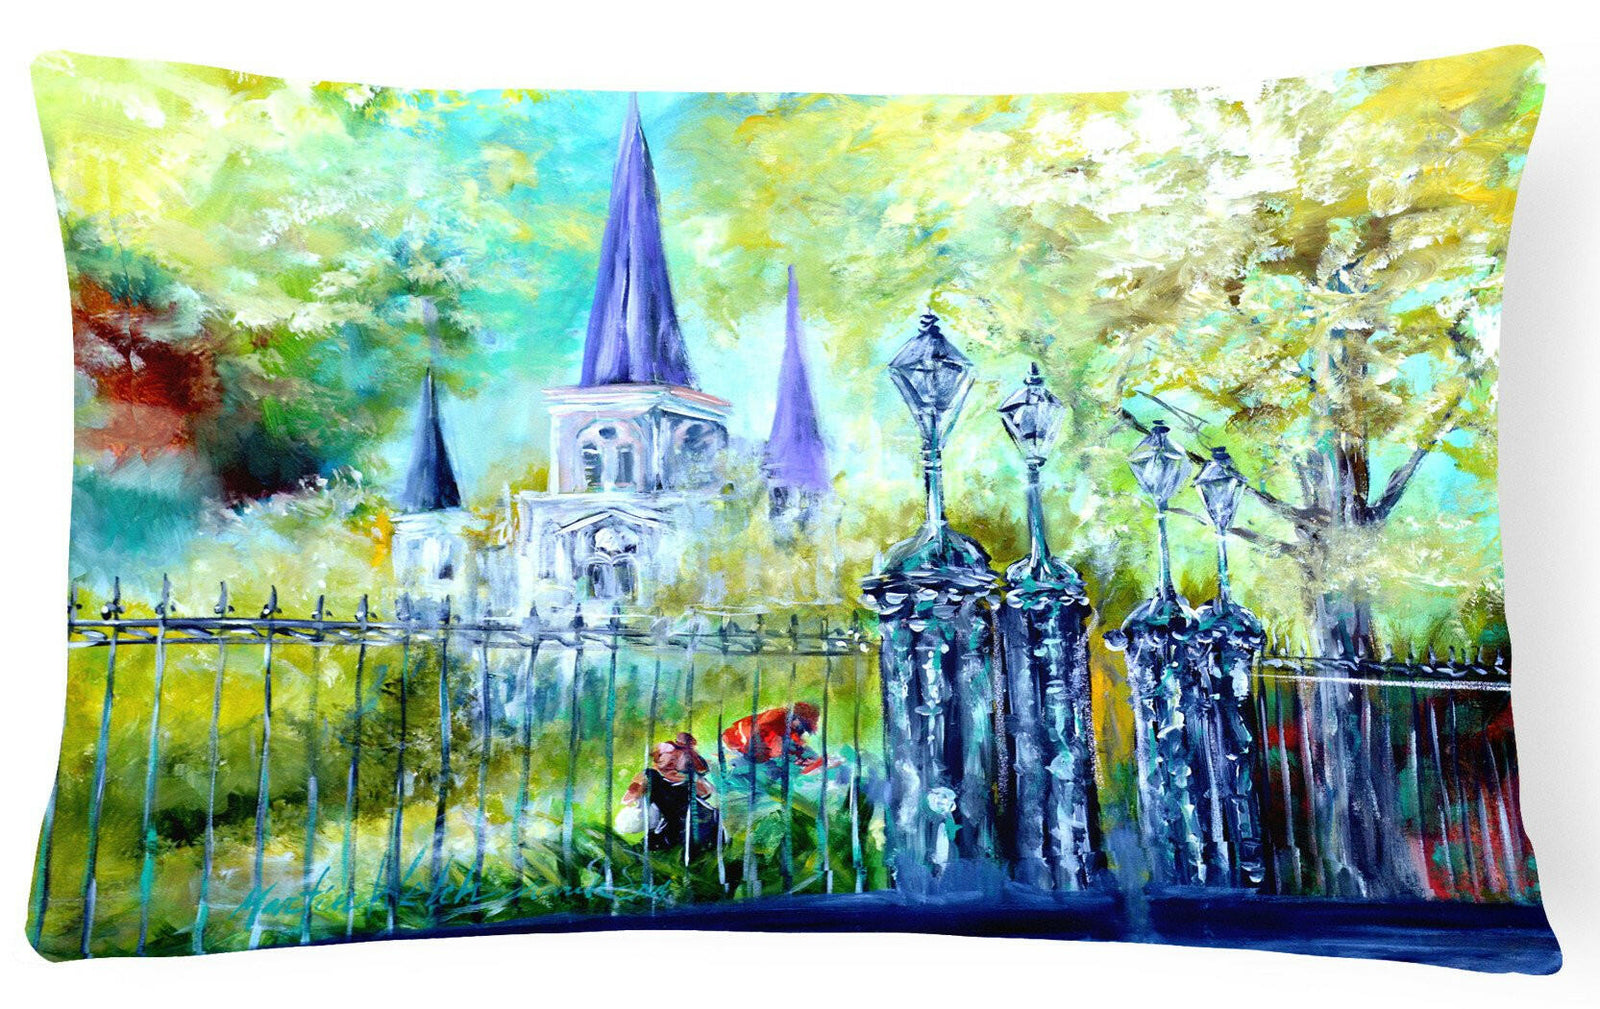 St Louis Cathedrial Across the Square Fabric Decorative Pillow MW1217PW1216 by Caroline's Treasures